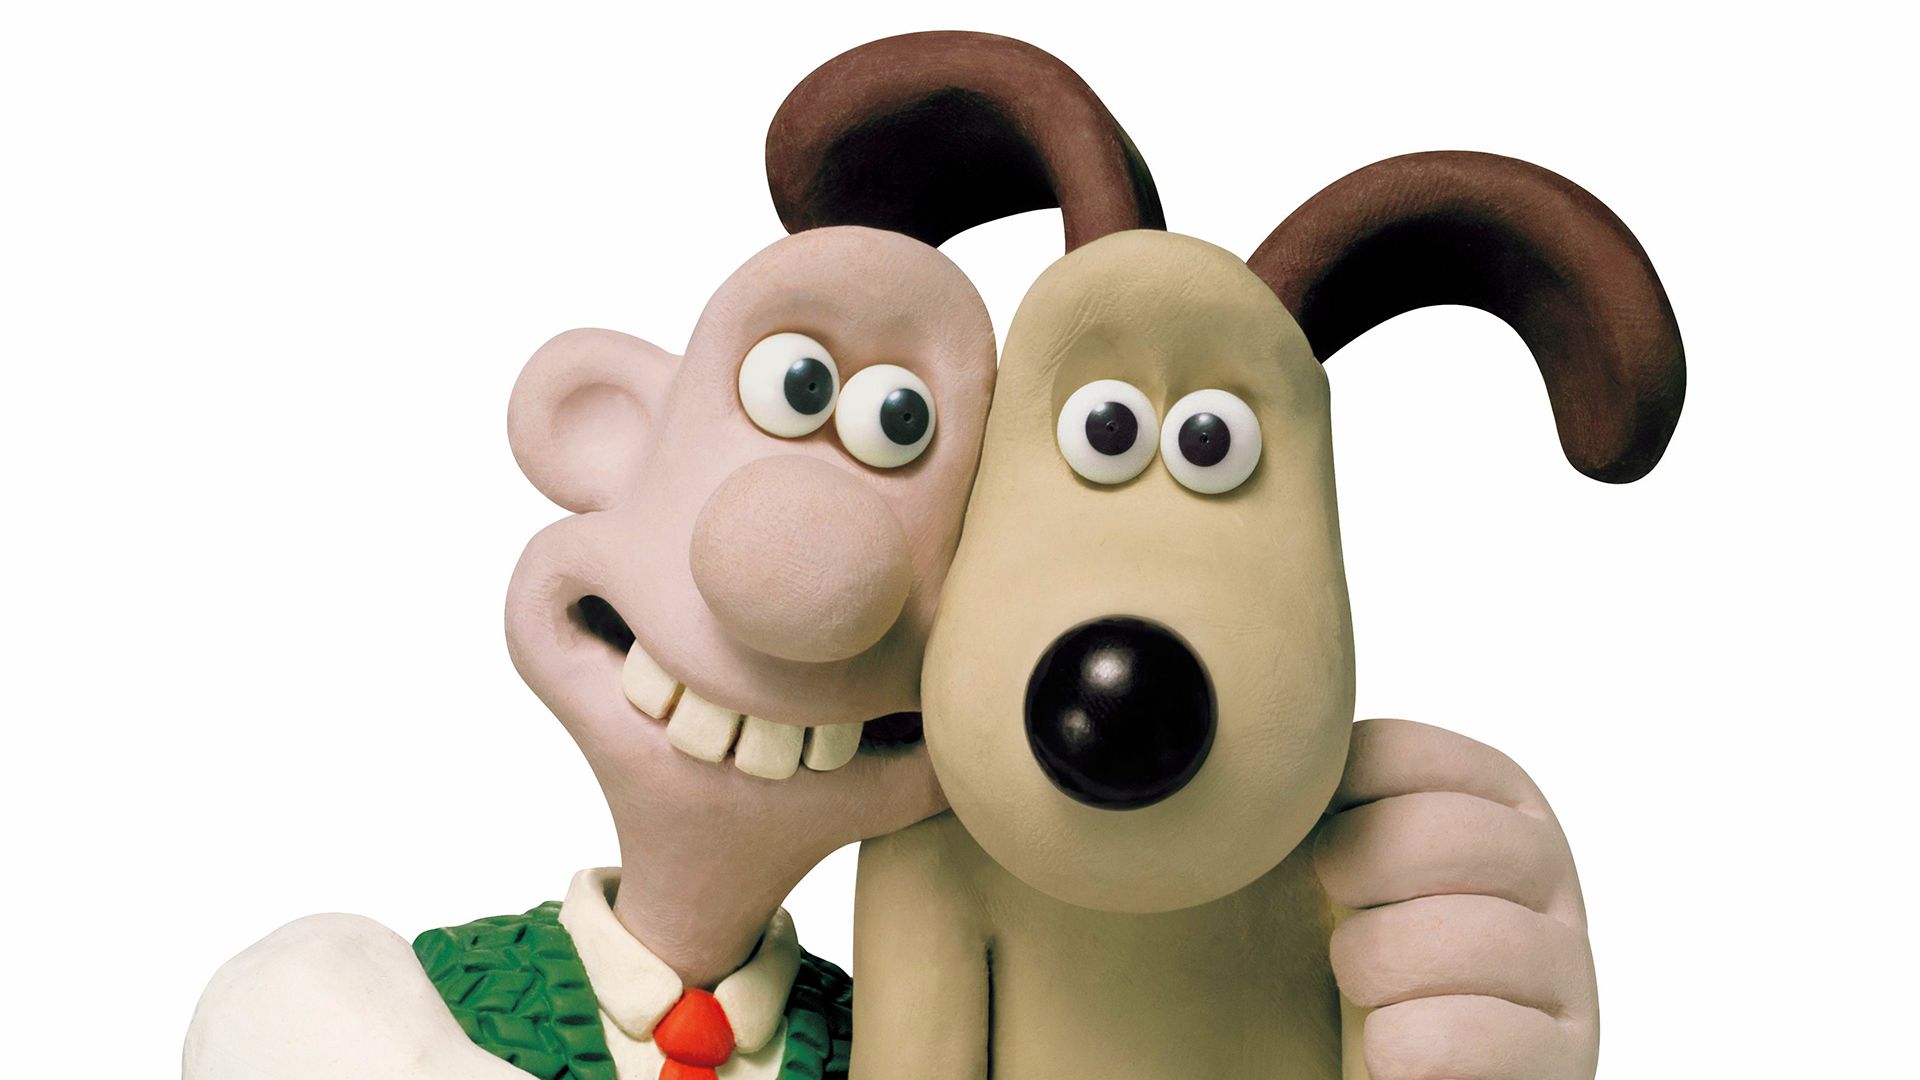 Wallace & Gromit background